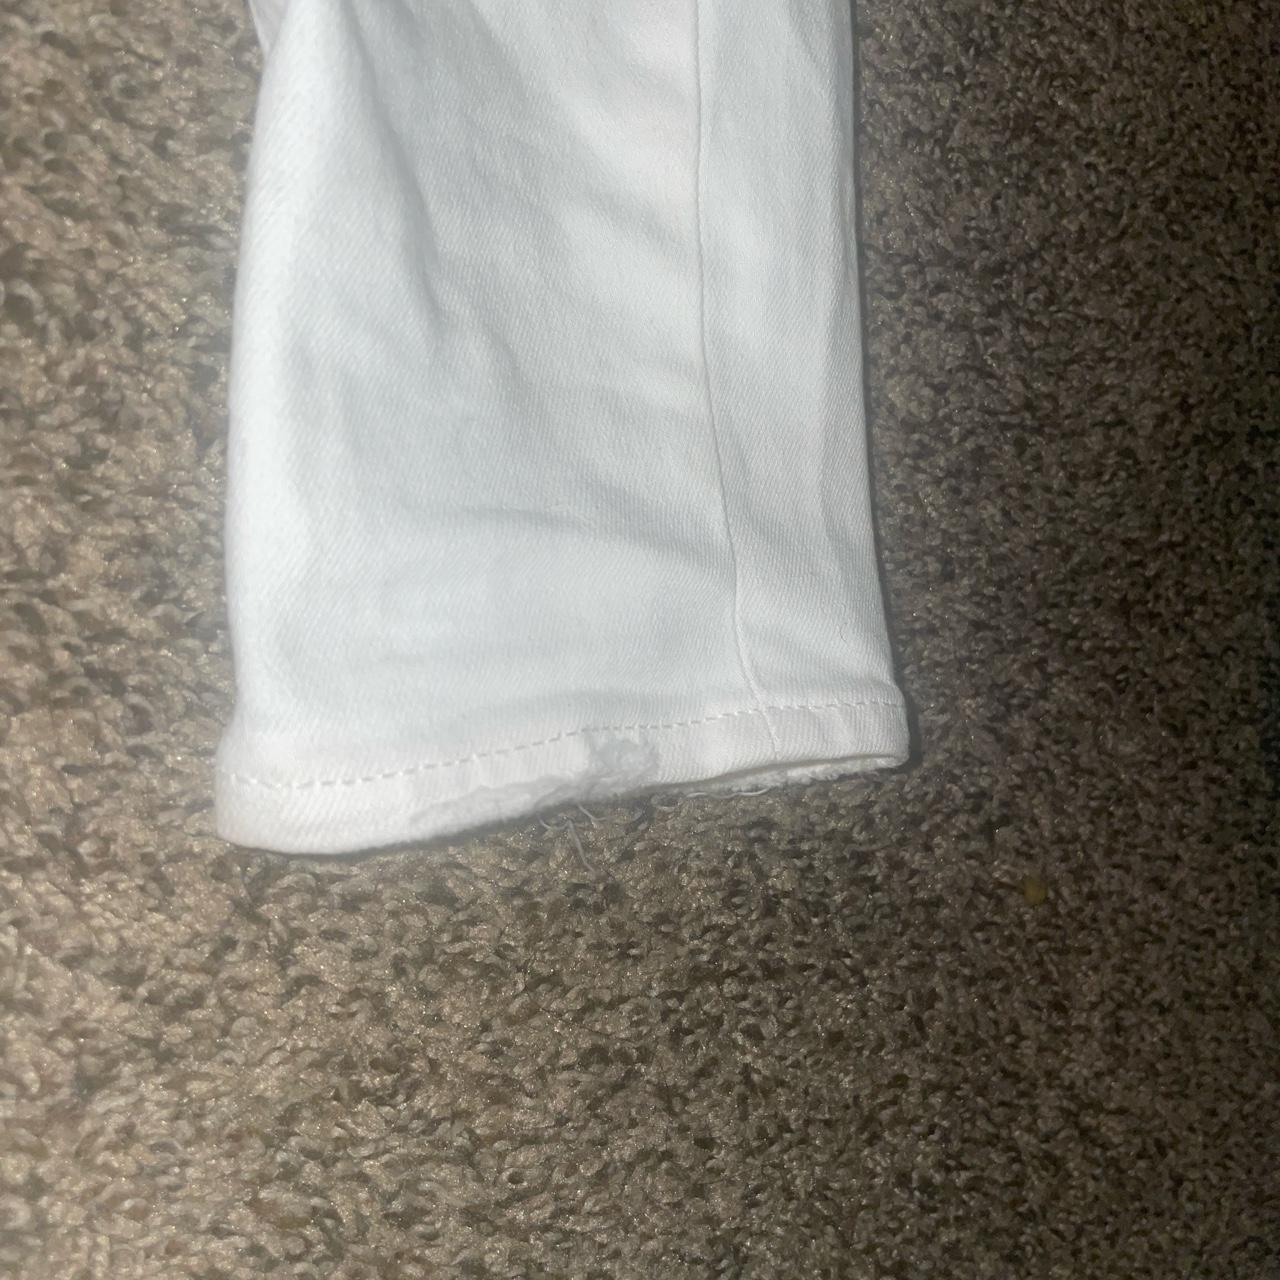 White Purple brand jeans will be taken to the - Depop